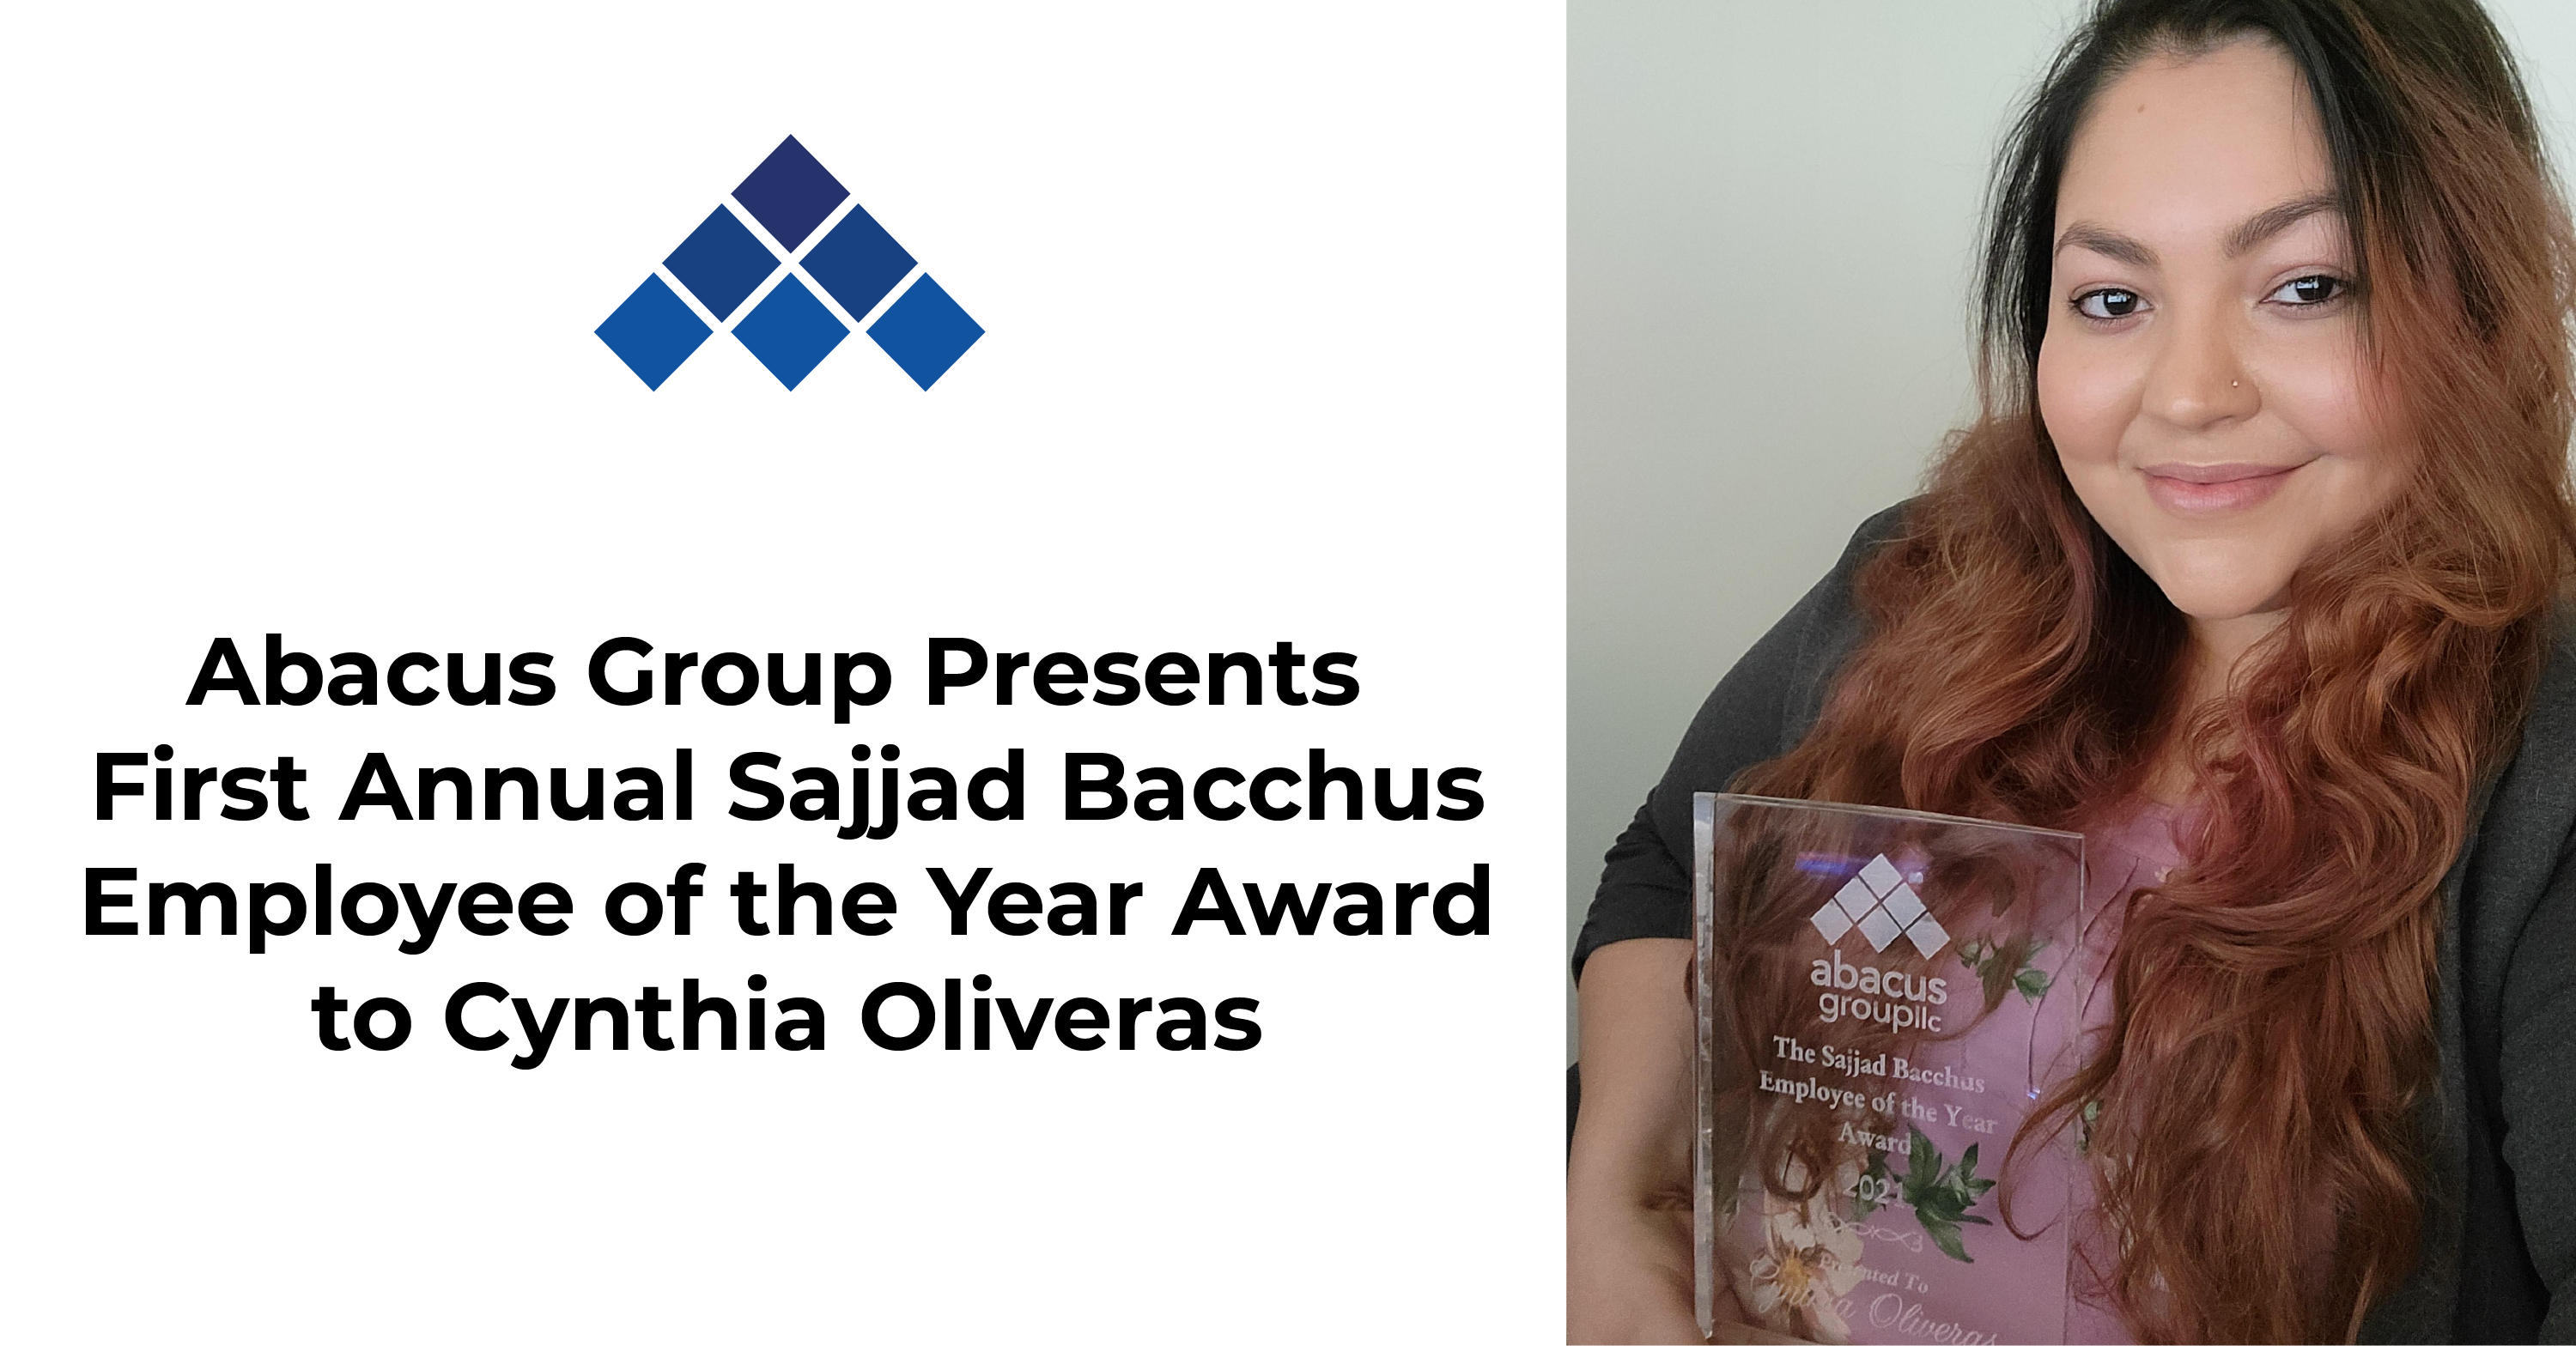 Abacus Group Presents First Annual Sajjad Bacchus - Employee of the Year Award to Cynthia Oliveras